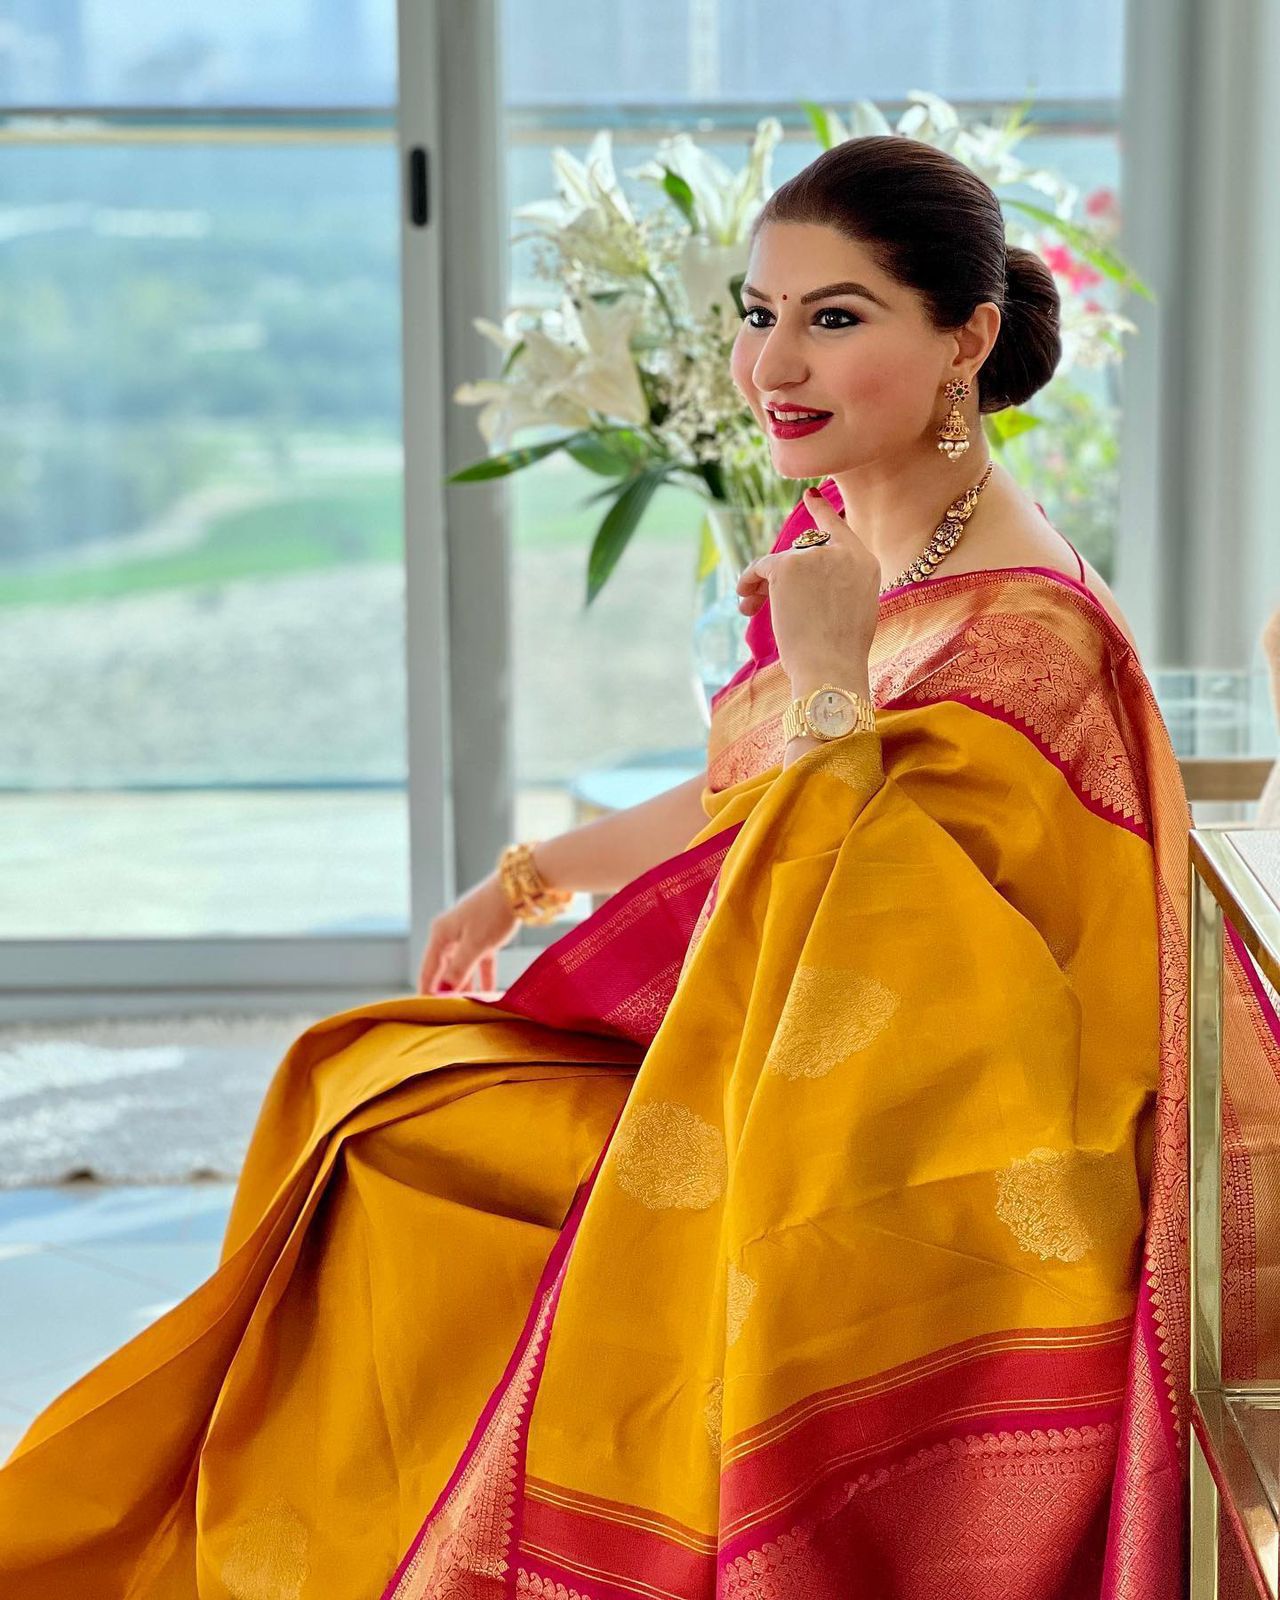 Buy Women's Pure Katan Banarasi Silk Saree Floral Heavy Jaal Work With  Traditional Design-Yellow Red at Amazon.in